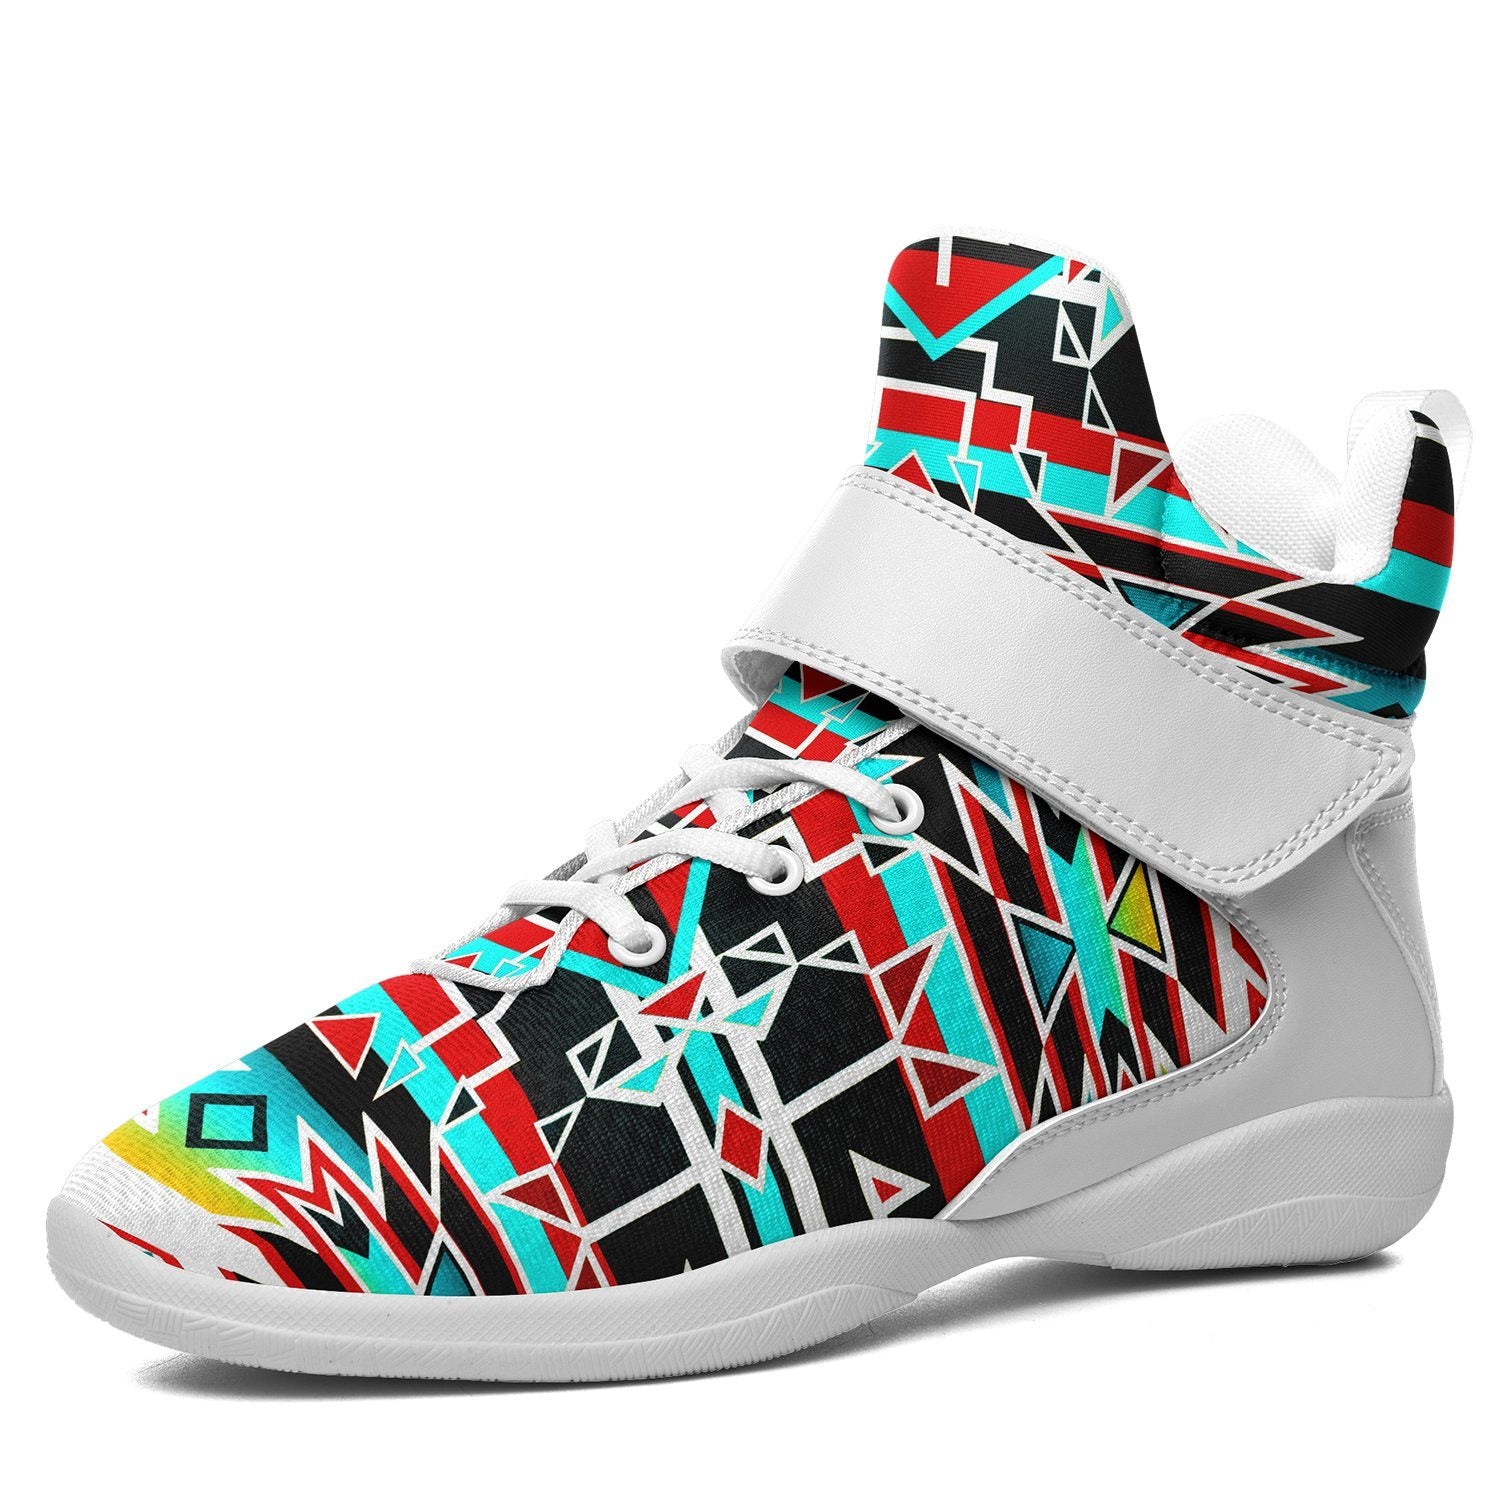 Force of Nature Windstorm Ipottaa Basketball / Sport High Top Shoes 49 Dzine US Women 4.5 / US Youth 3.5 / EUR 35 White Sole with White Strap 